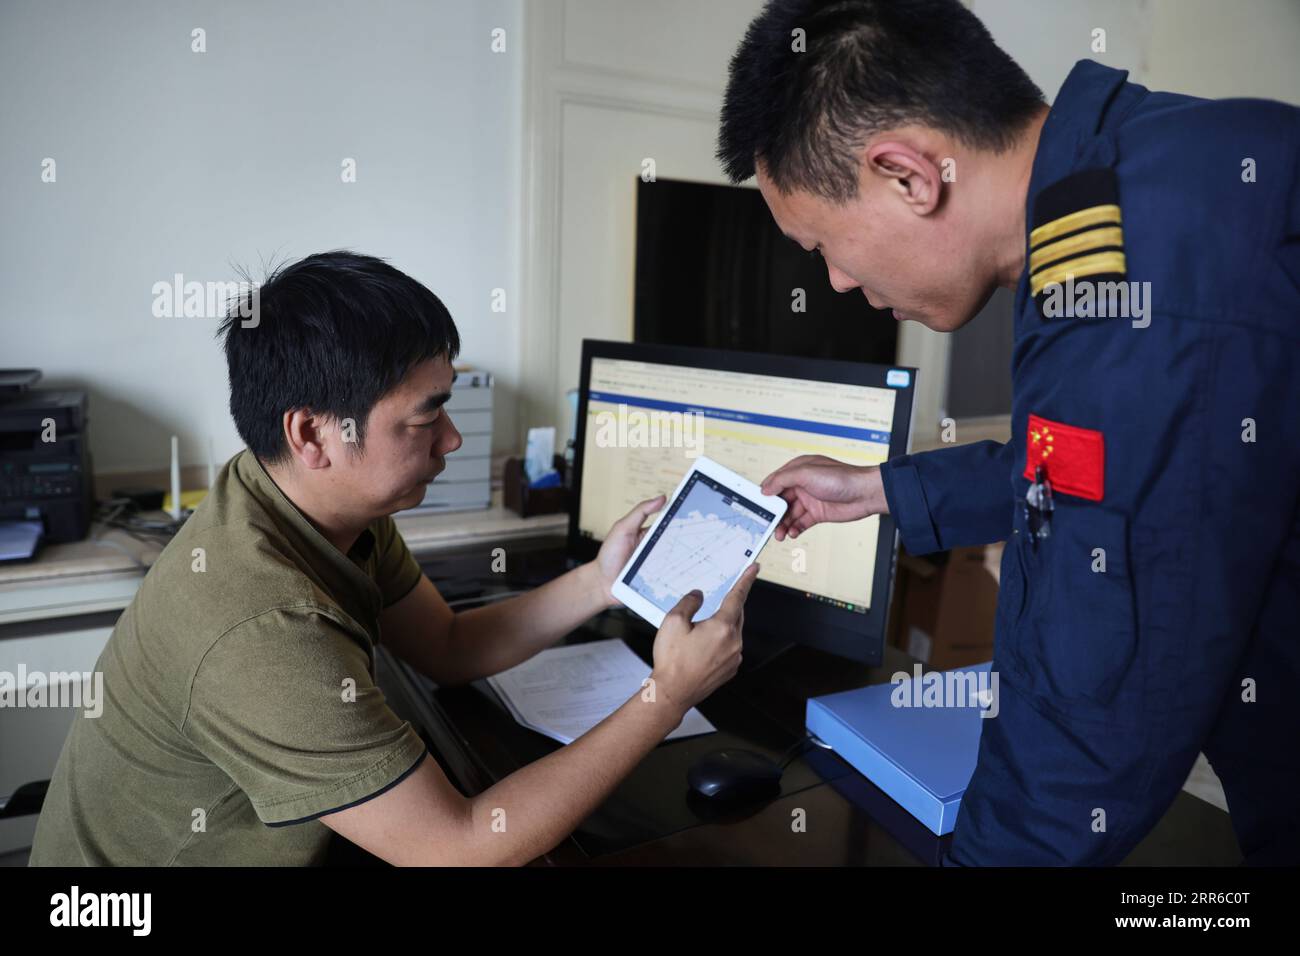 210205 -- SANYA, Feb. 5, 2021 -- Li Hangbing L and Sun Dongsheng, both members of the Nanhai No. 1 Flying Service of Ministry of Transport, an air rescue and aid team, make a flight plan in Sanya City of south China s Hainan Province, Jan. 29, 2021. Critical moments of life or death are of a common memory to all members of the air rescue and aid team. As the only state-run force of air rescue and aid over waters around south China, the team has brought 94 people back to safety in 2020 alone. Amid each onslaught of typhoon when all ships haste home, rescue helicopters of the team always dash to Stock Photo